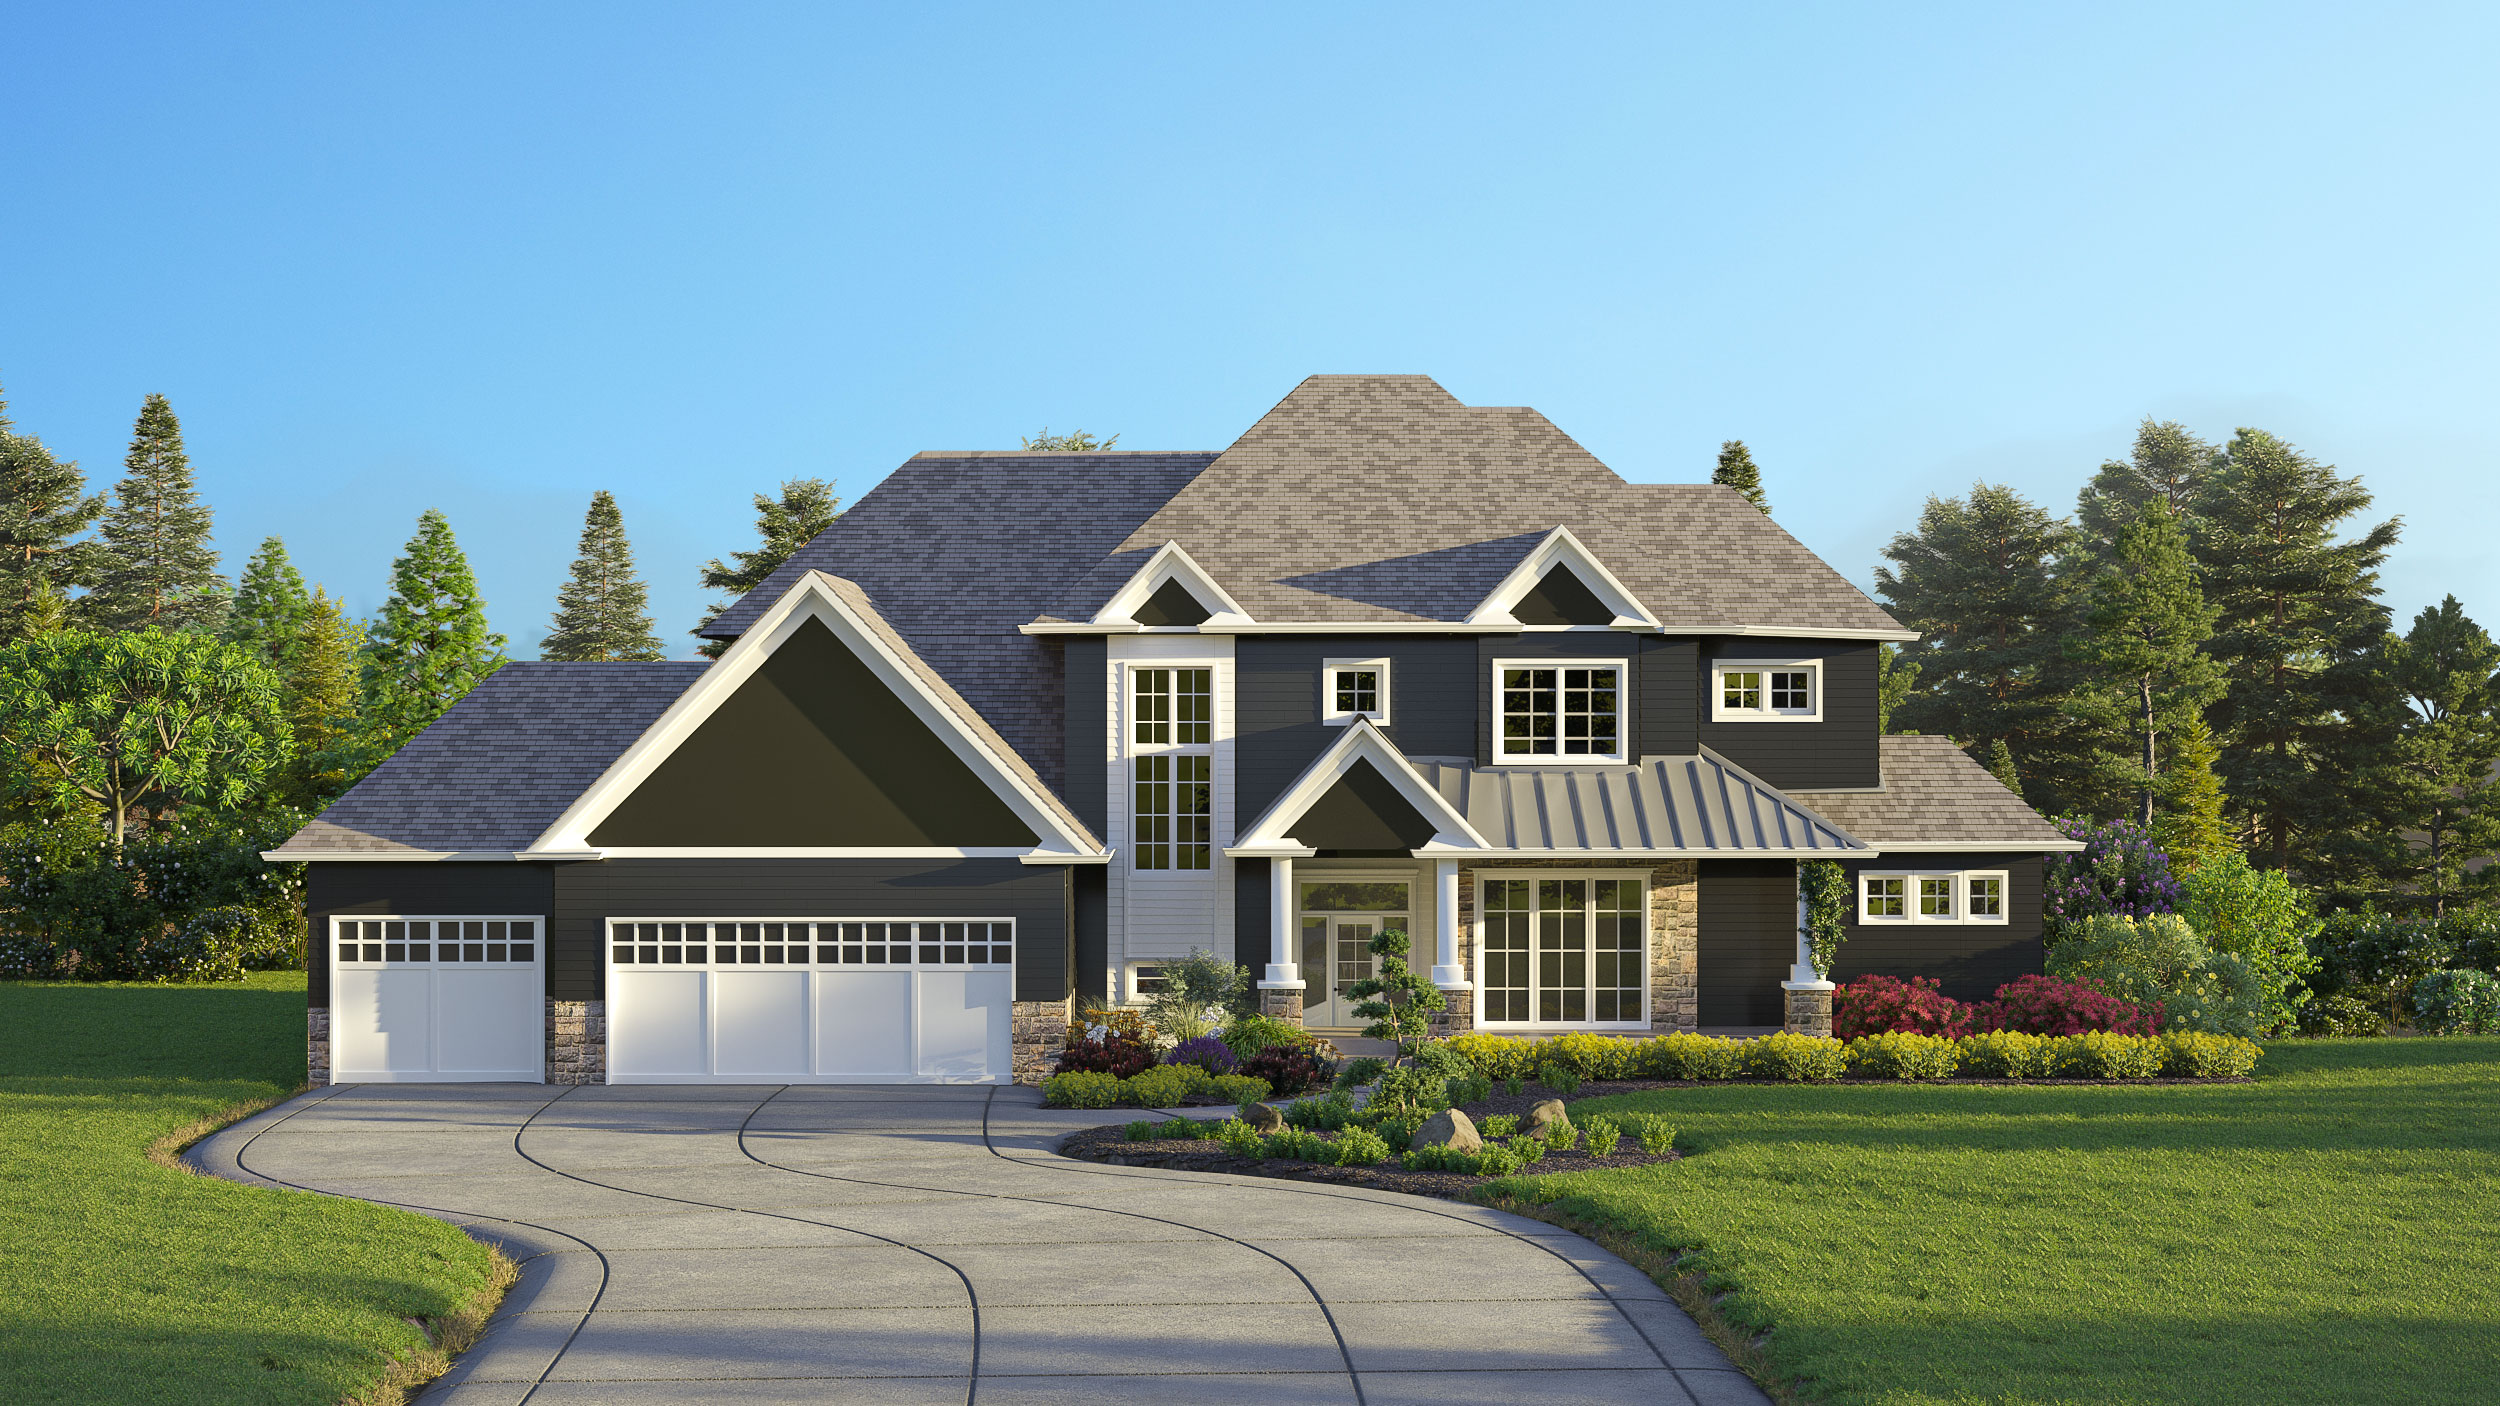 Bring Your Designs to Life with Our 3D Rendering Services